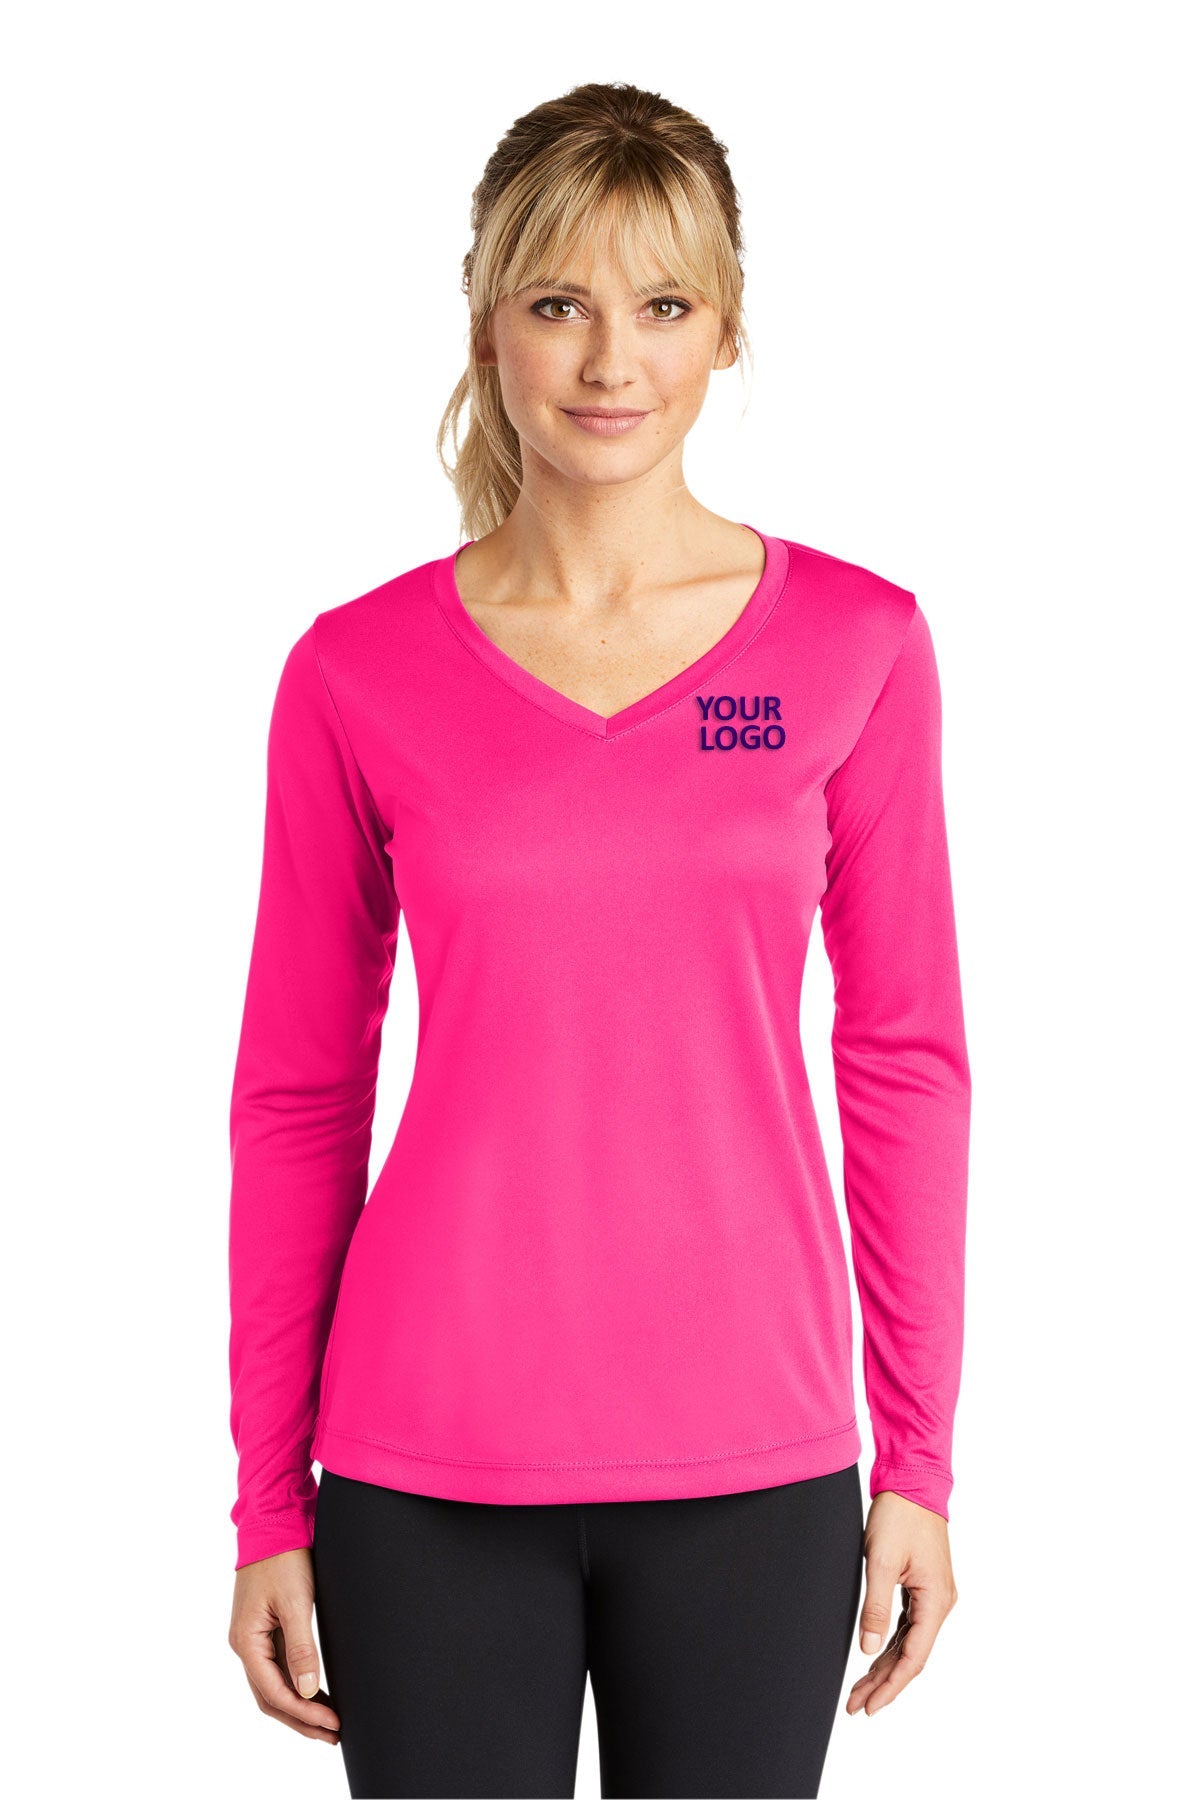 Sport-Tek Ladies Long Sleeve PosiCharge Competitor Customized V-Neck Tee's, Neon Pink